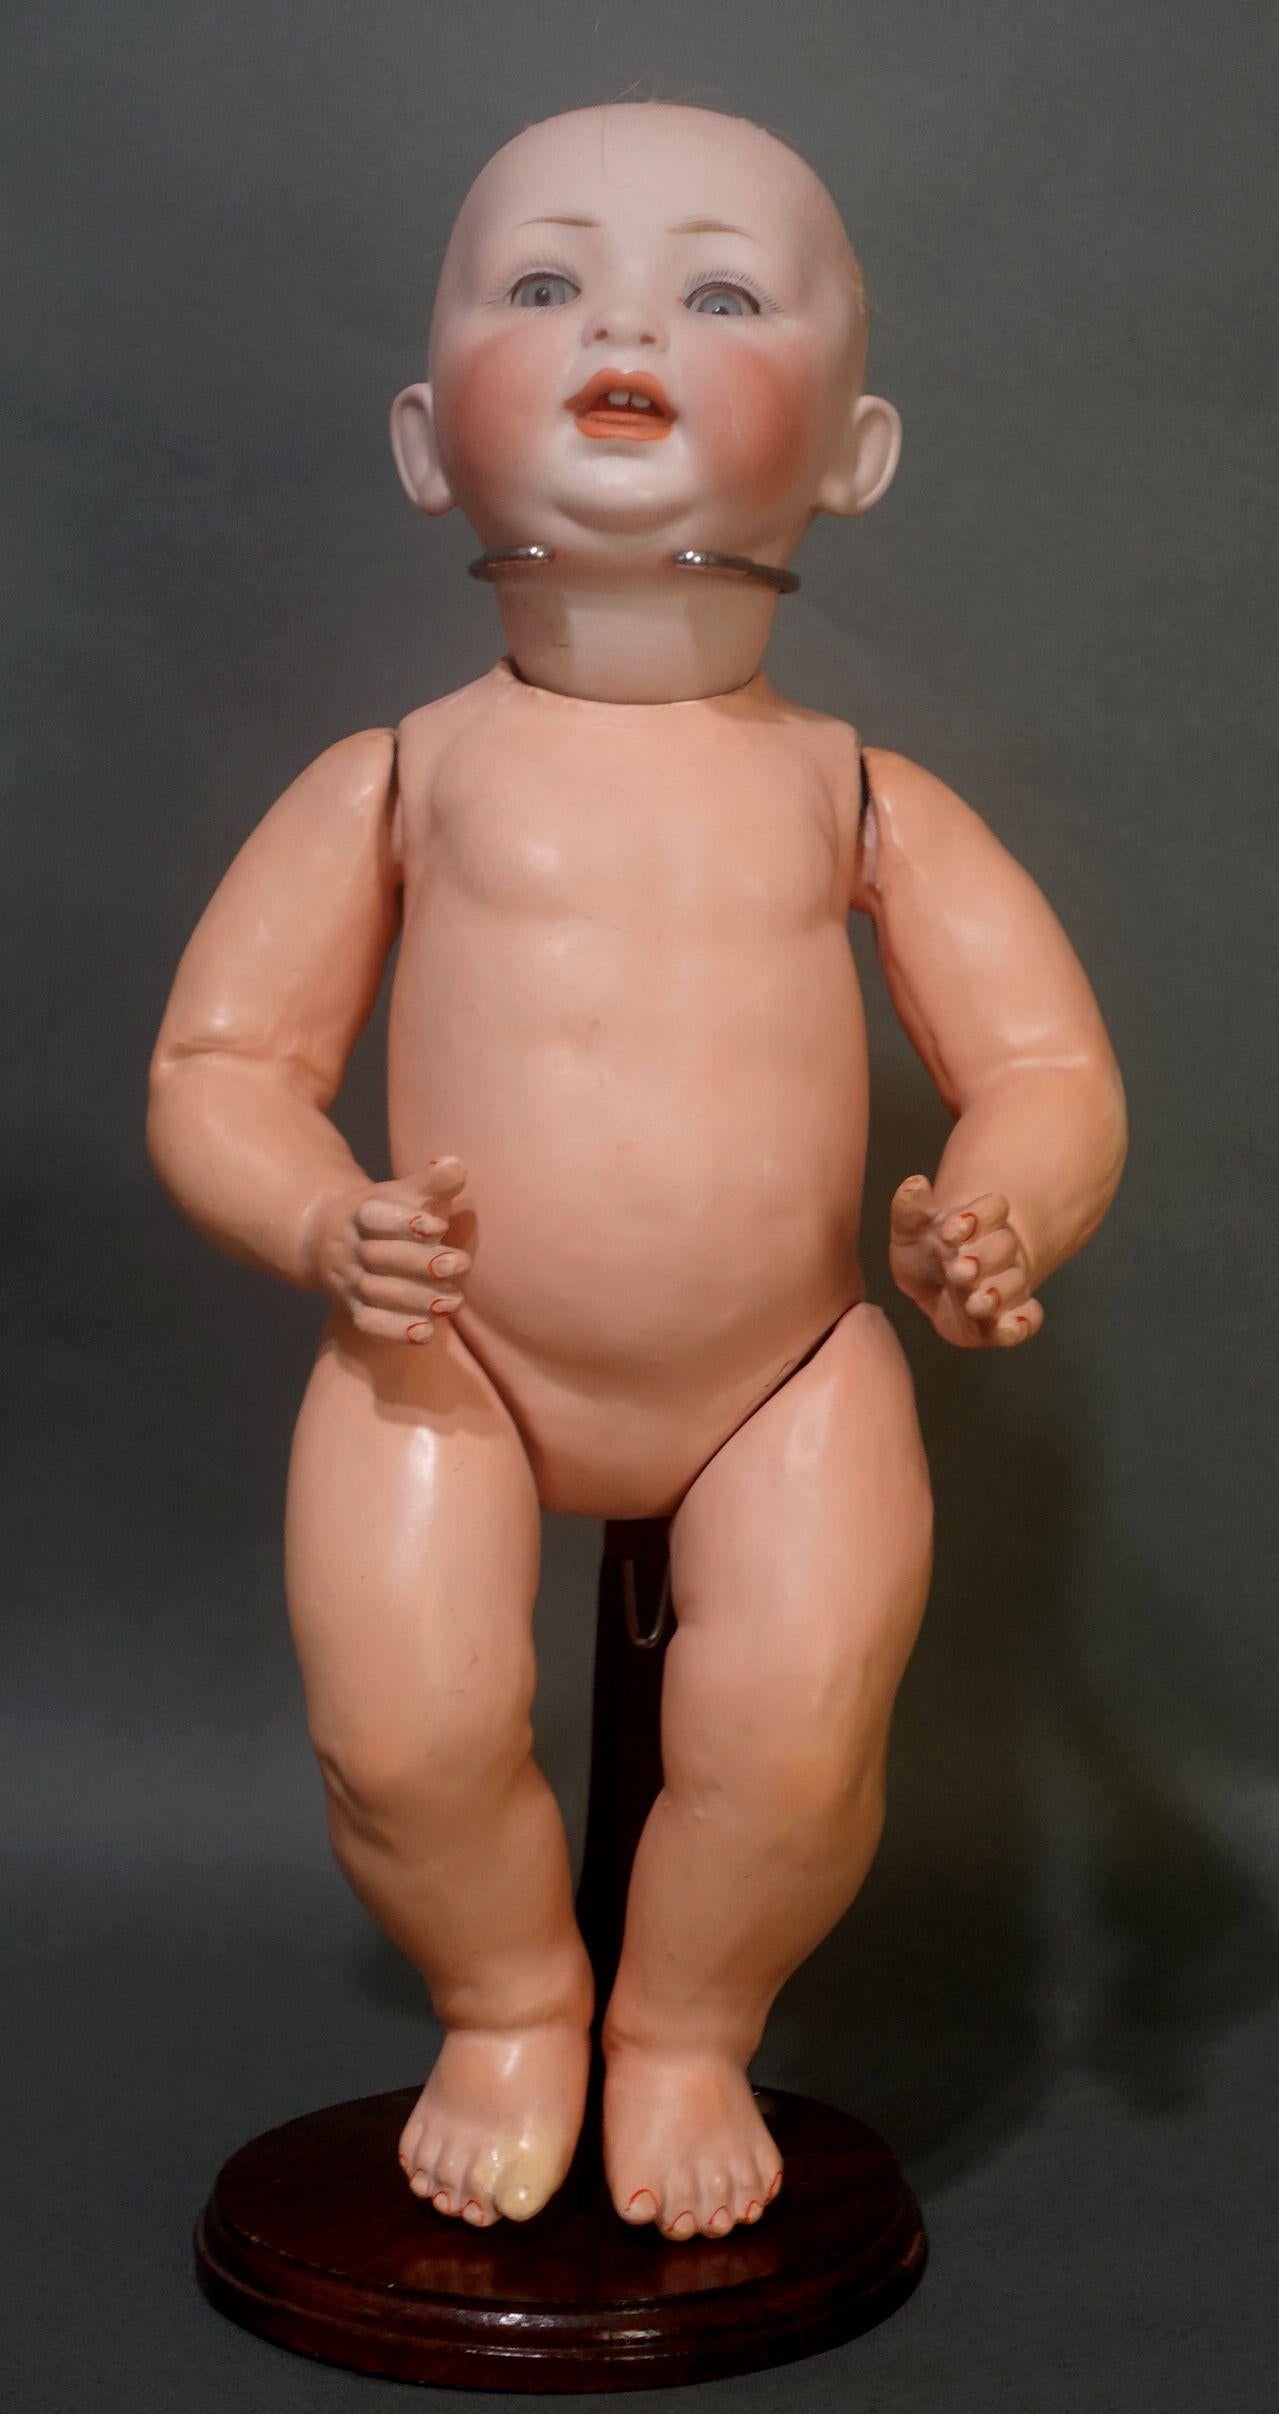 Antique German Bisque Doll #152/4 Happy Character Baby by Hertel Schwab In Good Condition For Sale In Norton, MA